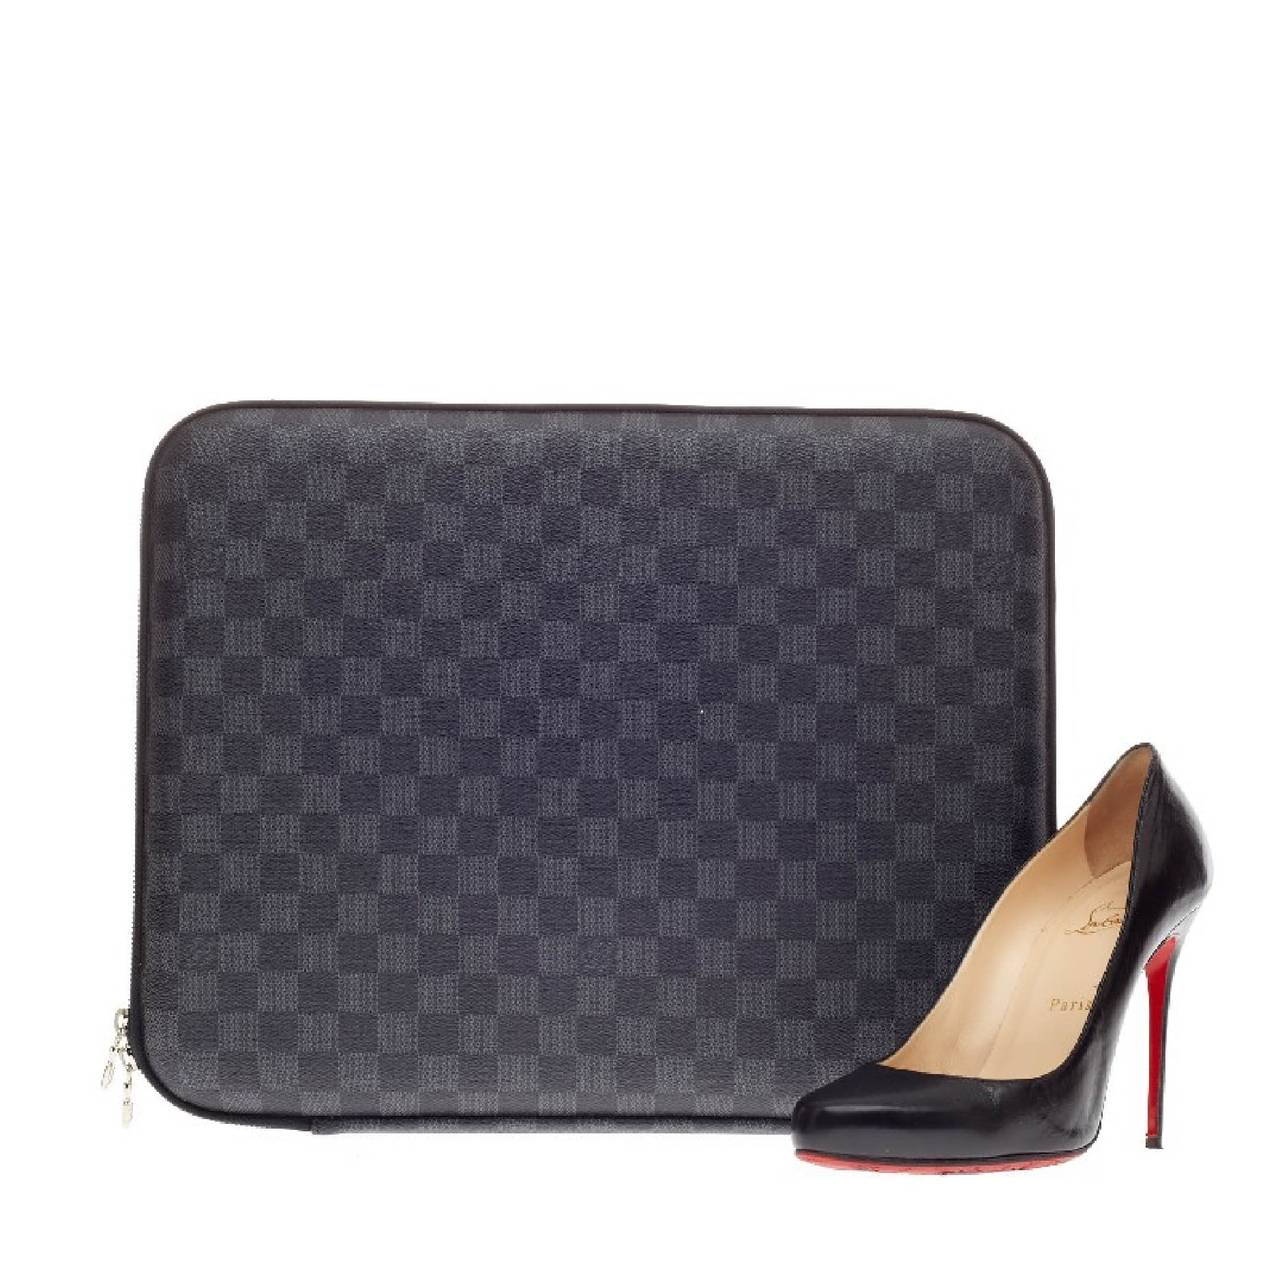 This authentic Louis Vuitton Laptop Sleeve Damier Graphite Canvas 15 designed from iconic damier graphite canvas is a slim laptop case that features silver hardware accents and a zip-around closure. The case's black foam interior showcases an